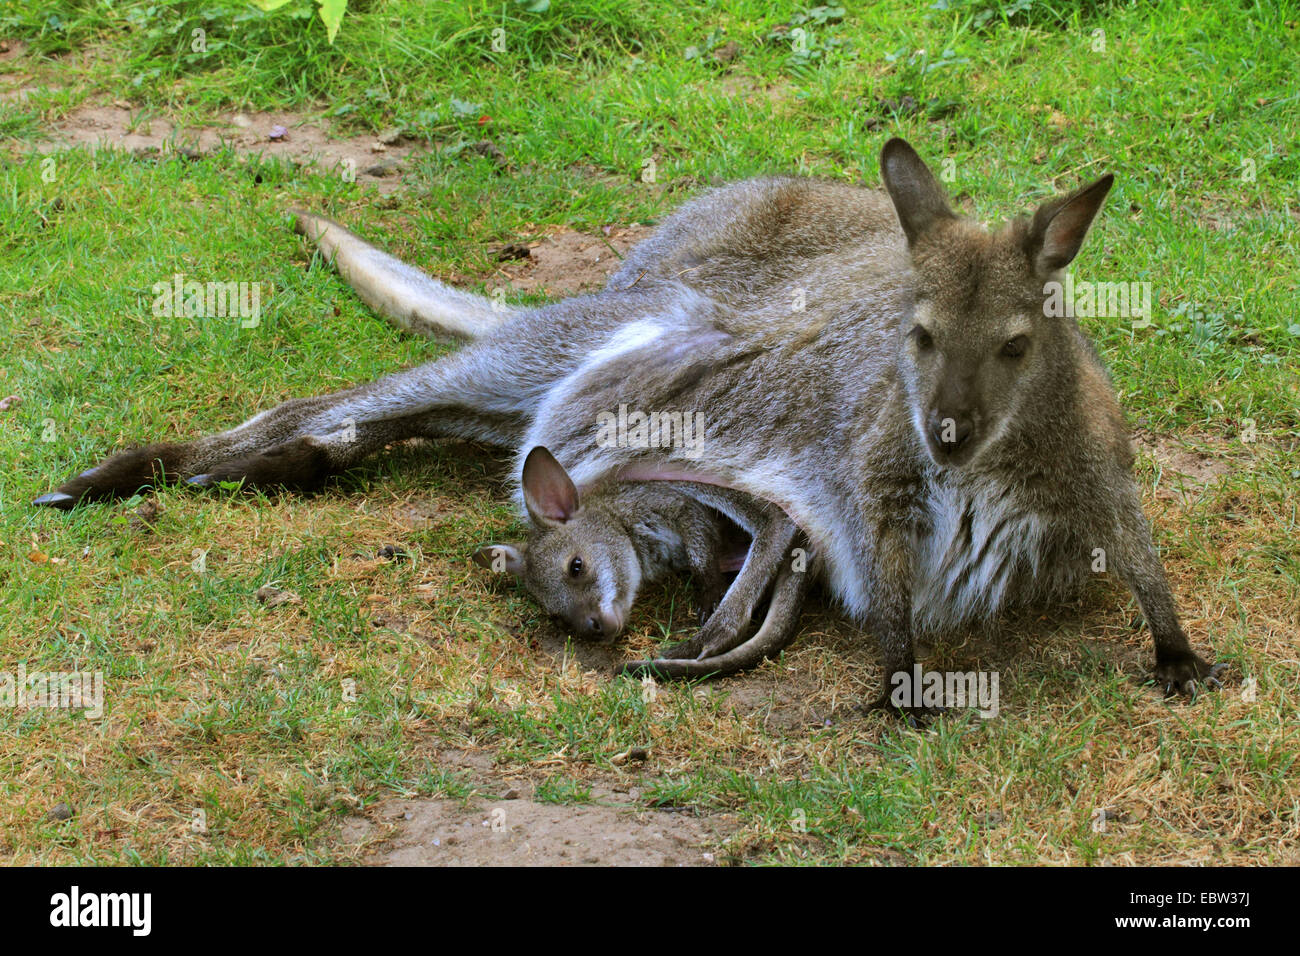 red-necked wallaby, Bennett┤s Wallaby (Macropus rufogriseus, Wallabia rufogrisea), lying with young animal in pouch in meadow Stock Photo